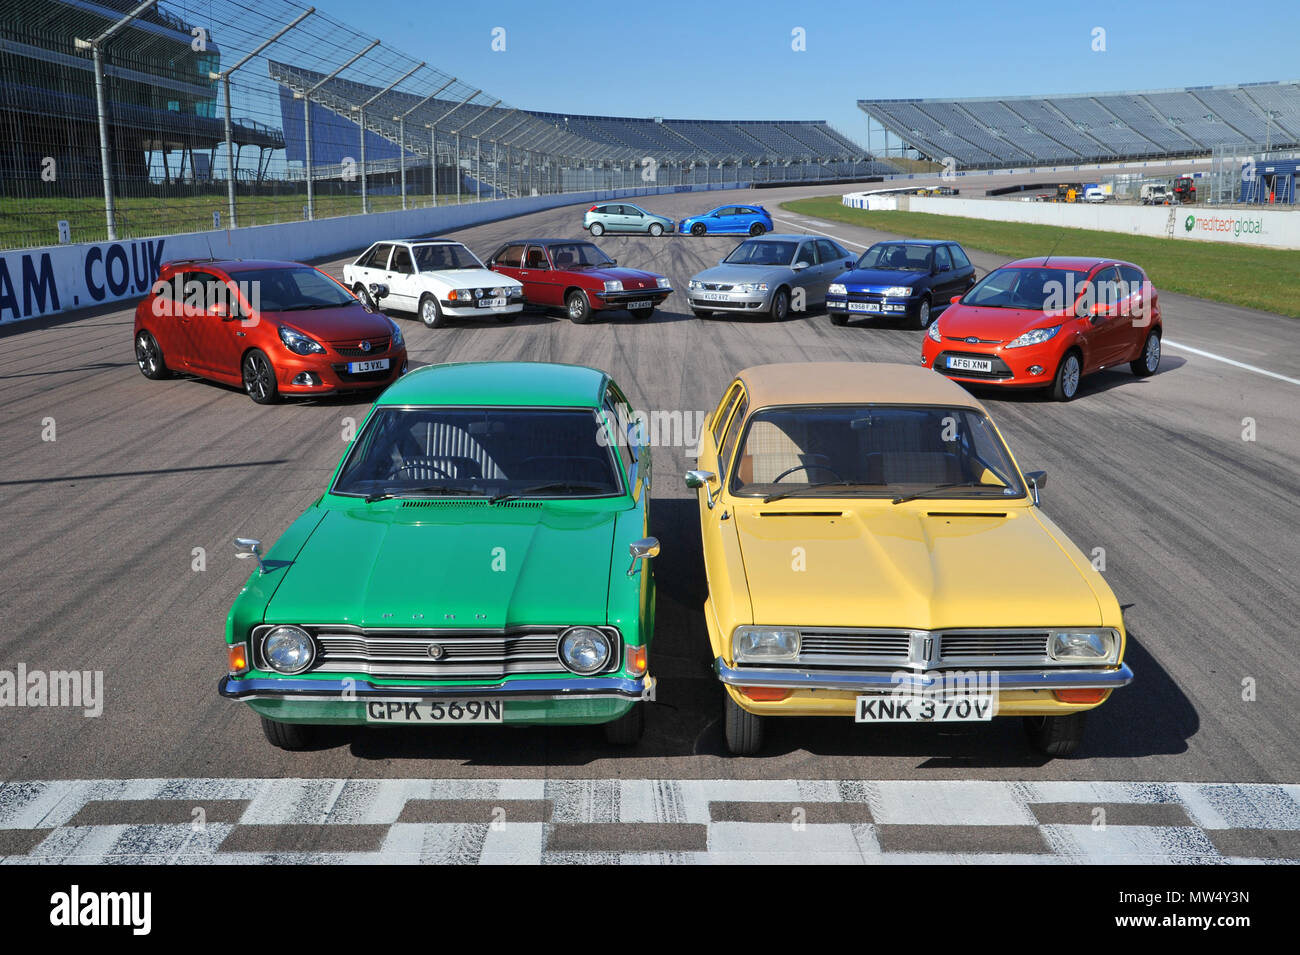 40 years of best sellers - Ford and Vauxhall rival cars from the 1970s to 2010s Stock Photo